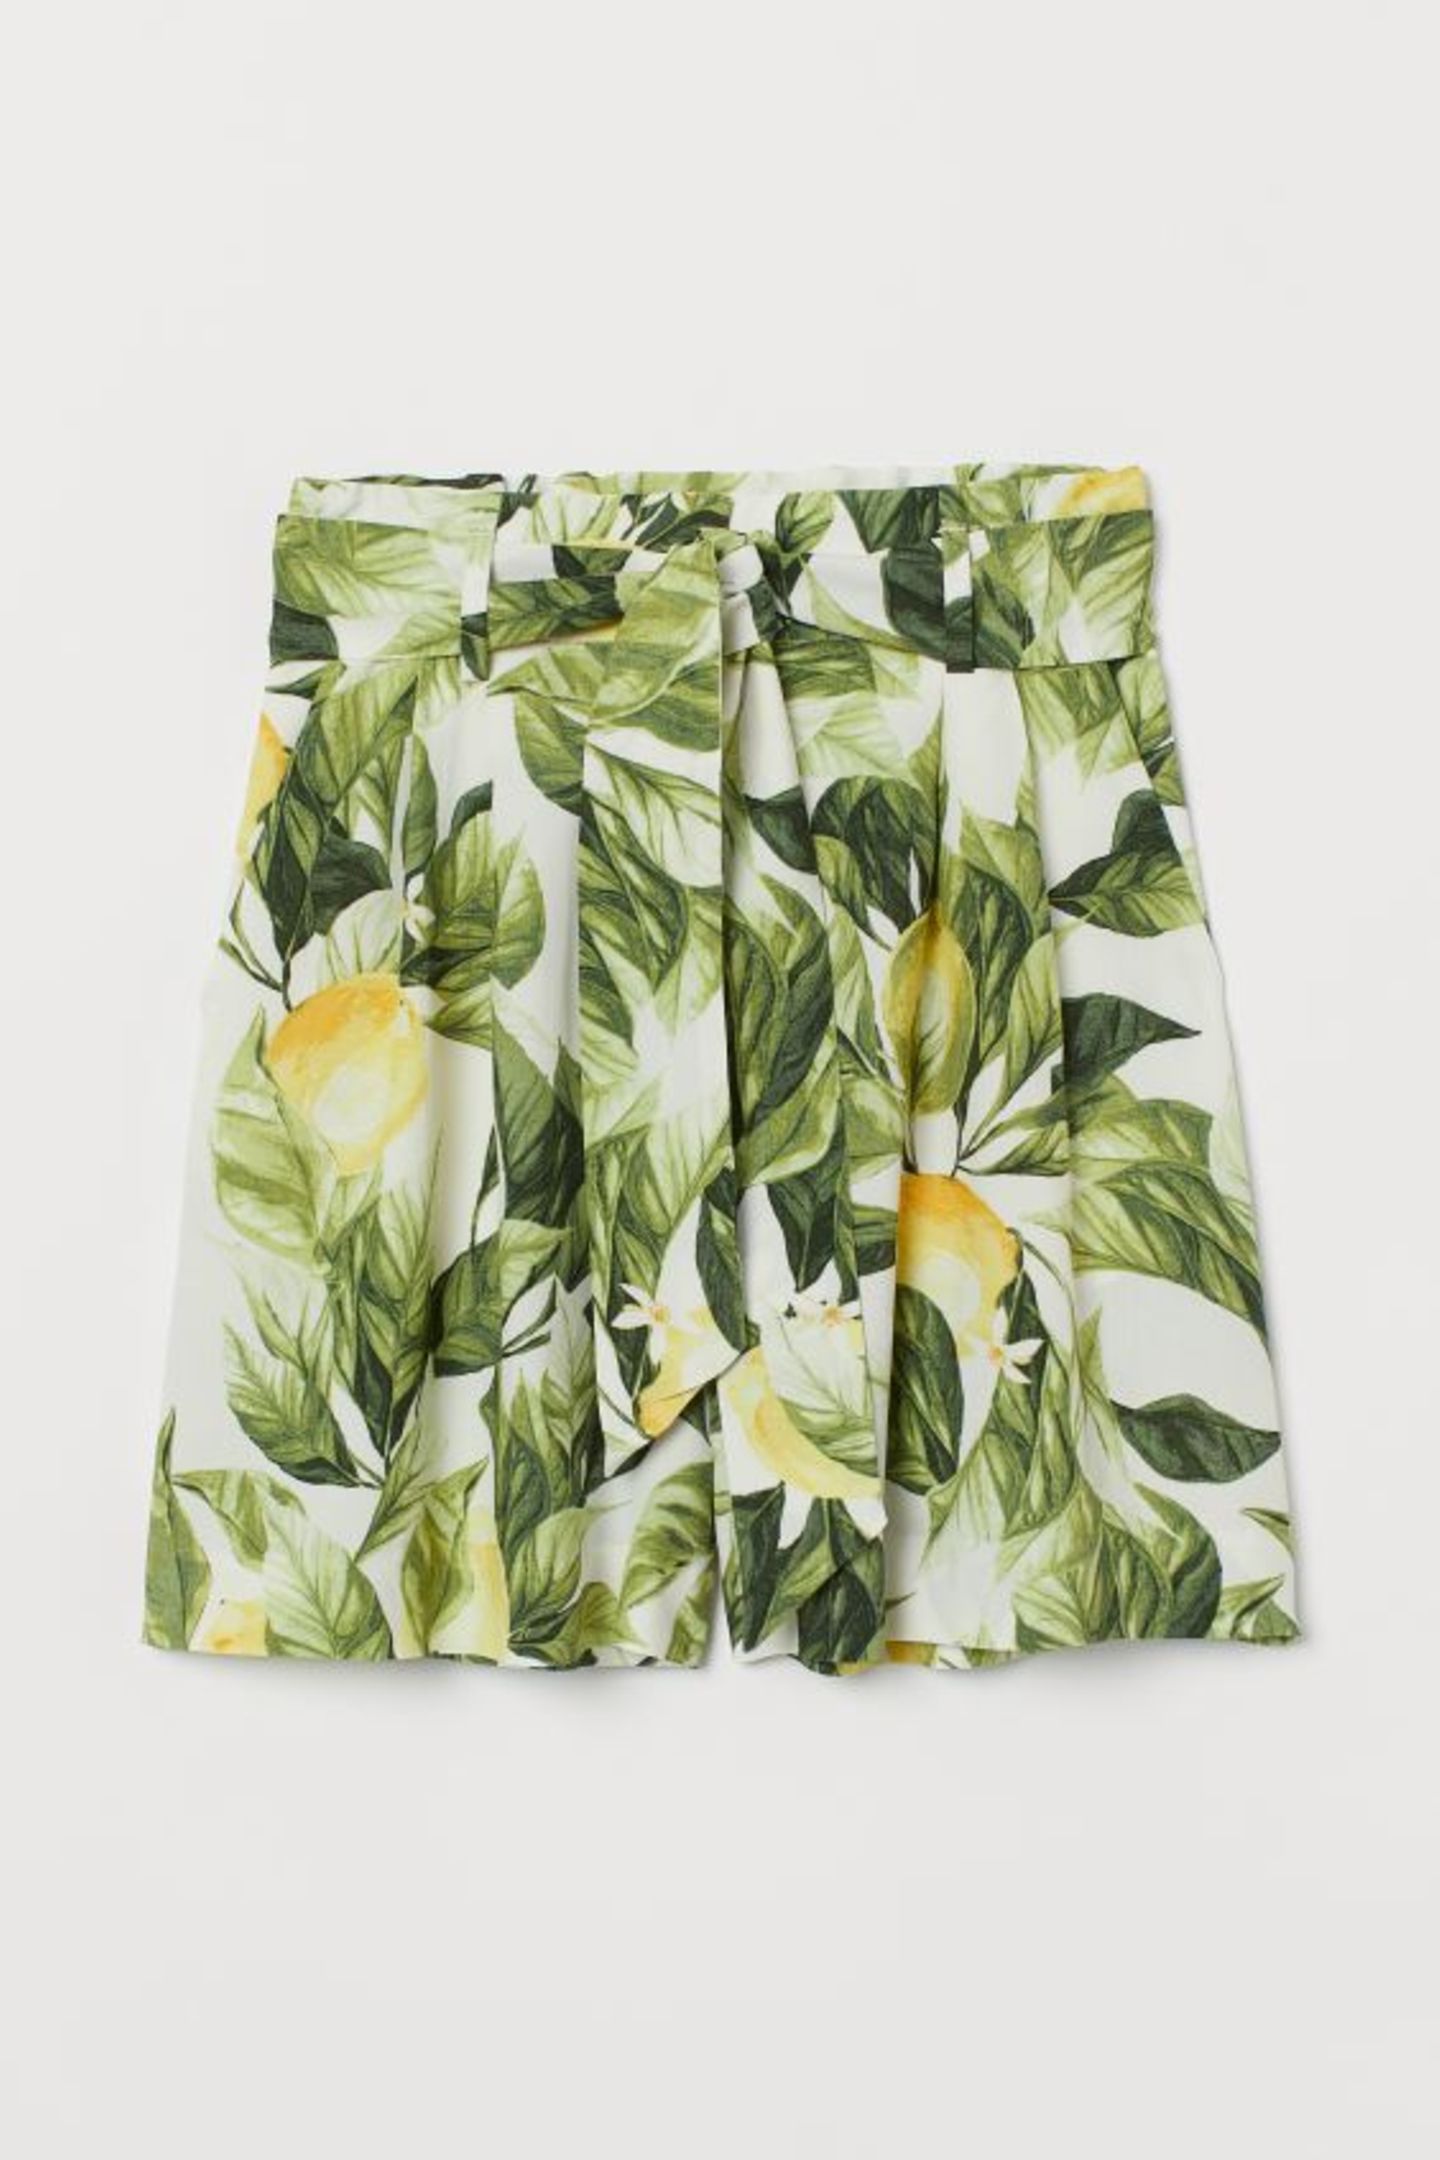 In the summer of 2020, lemons will not only be in our drink, but also on our shorts. And one thing is certain: In this part, the mild summer days cannot last long enough. From H&M, for 8 euros. "Loading =" eager